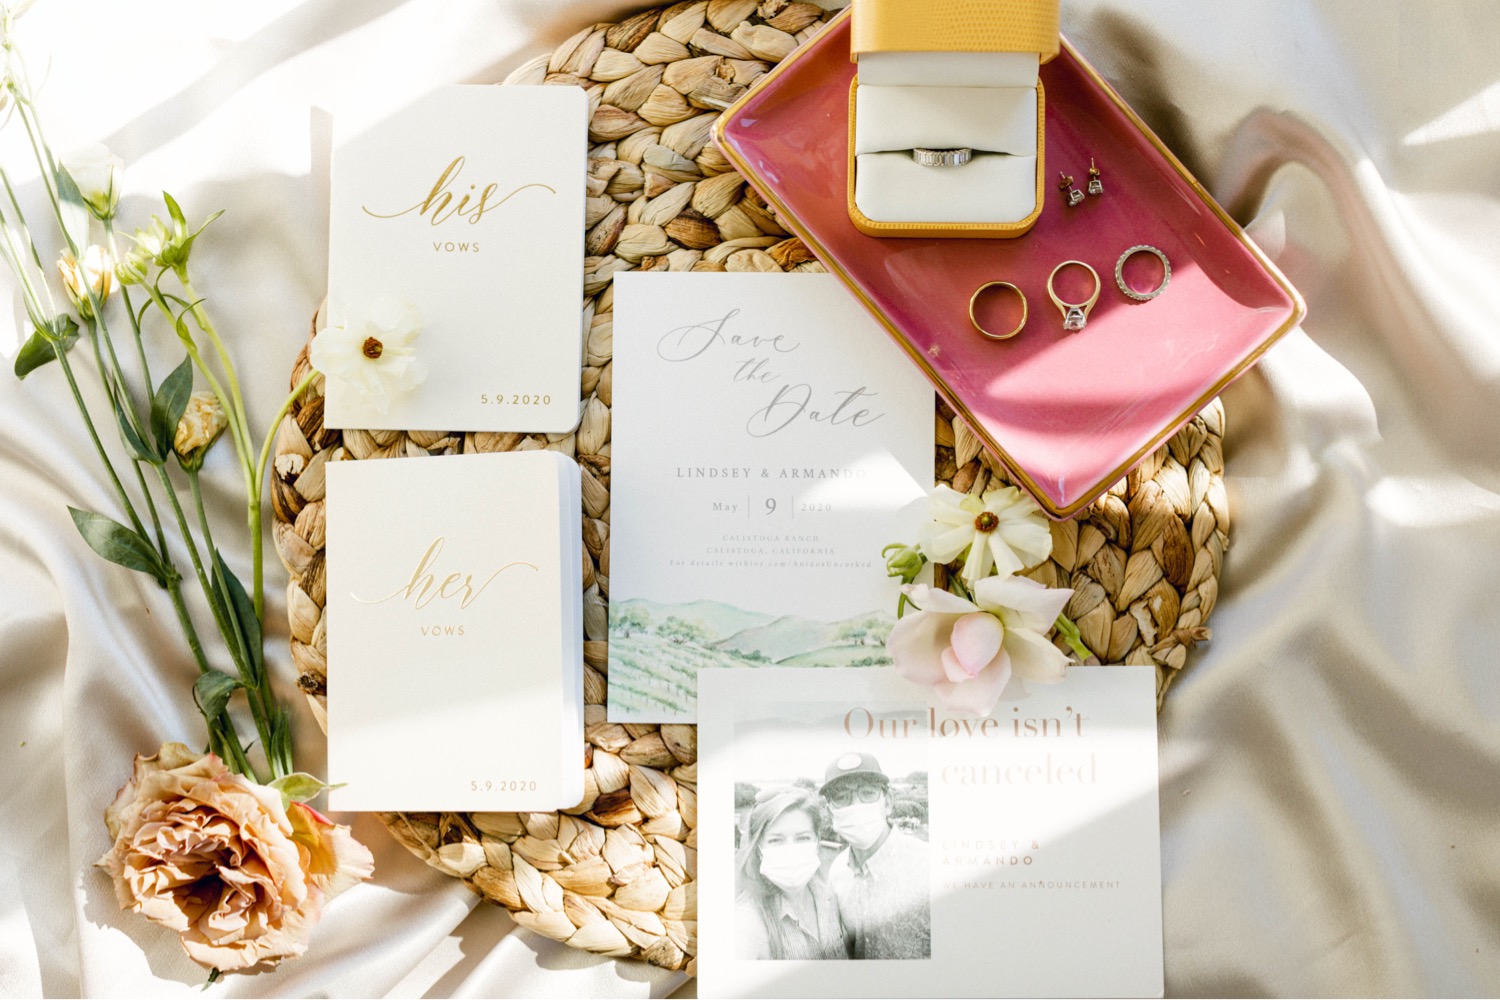 vows rings invitation details luxurious backyard wedding